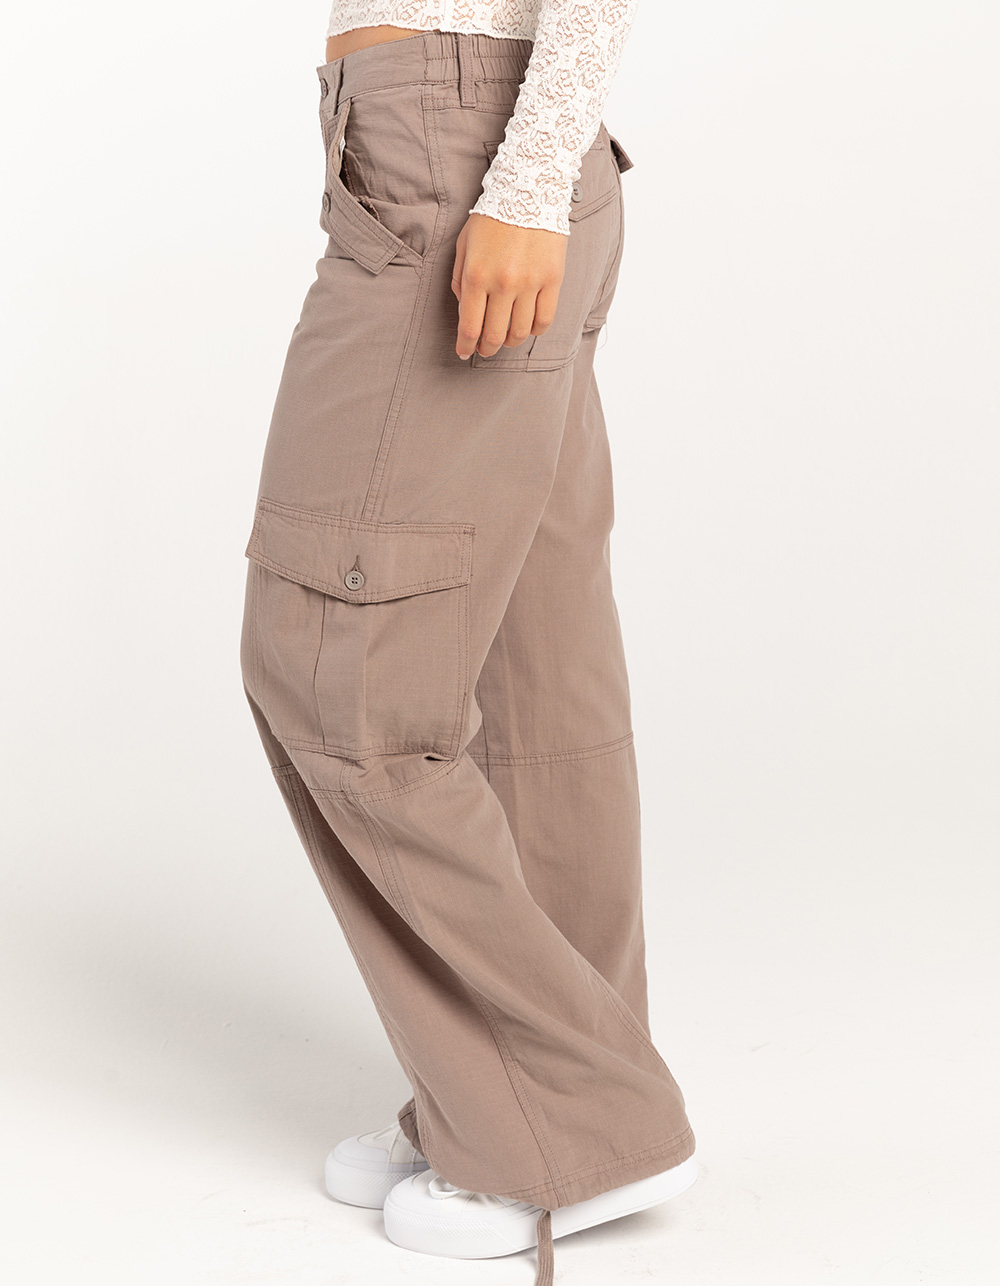 RSQ Womens Low Rise Ripstop Cargo Pants - TAUPE